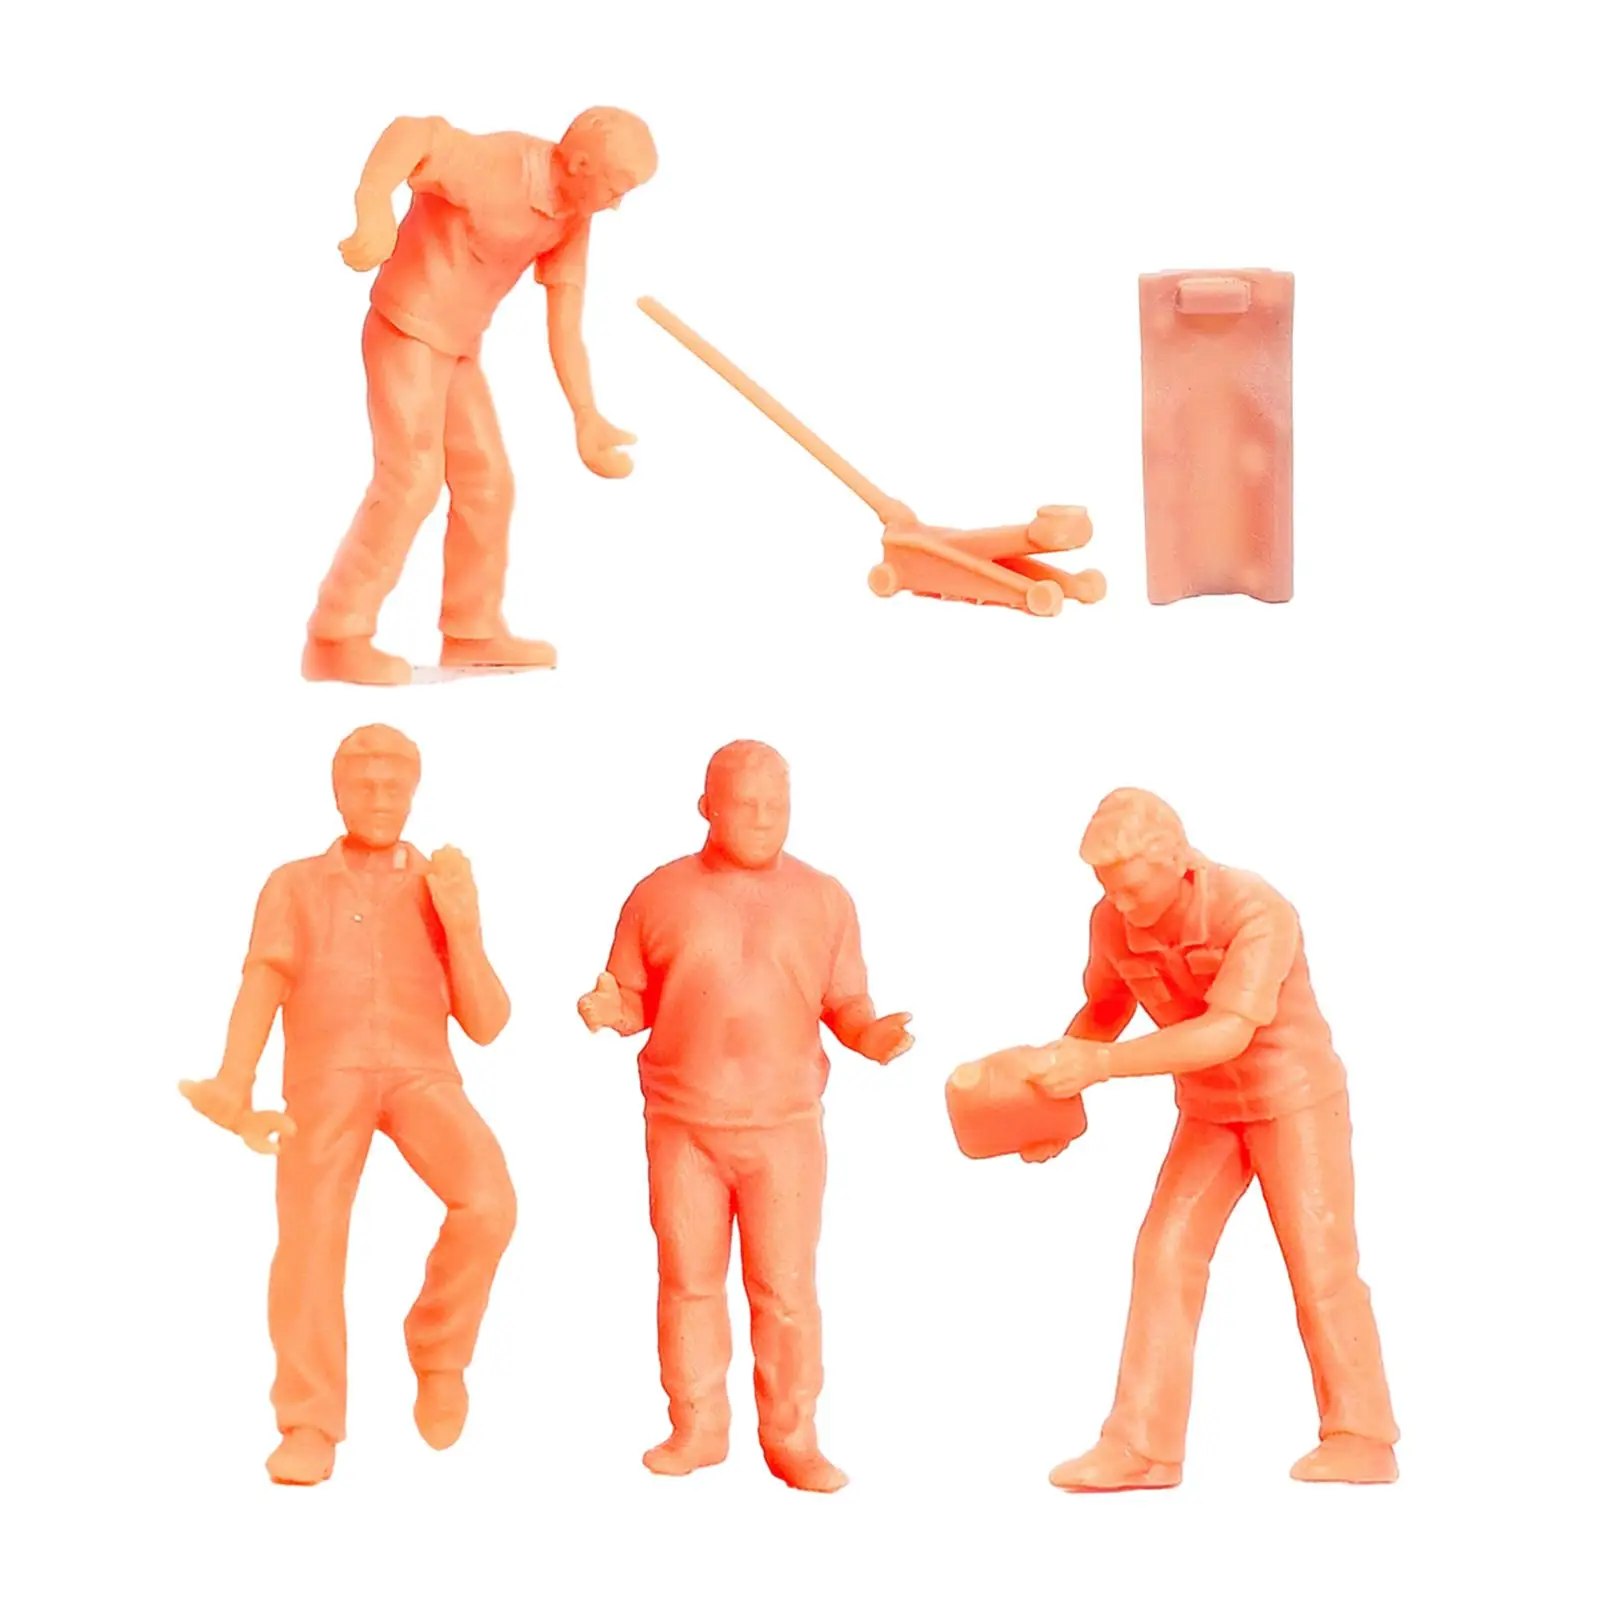 1/64 Scale Service Man Architectural Resin Realistic Tiny People Unpainted for Fairy Garden Building Micro Landscape DIY Scenery